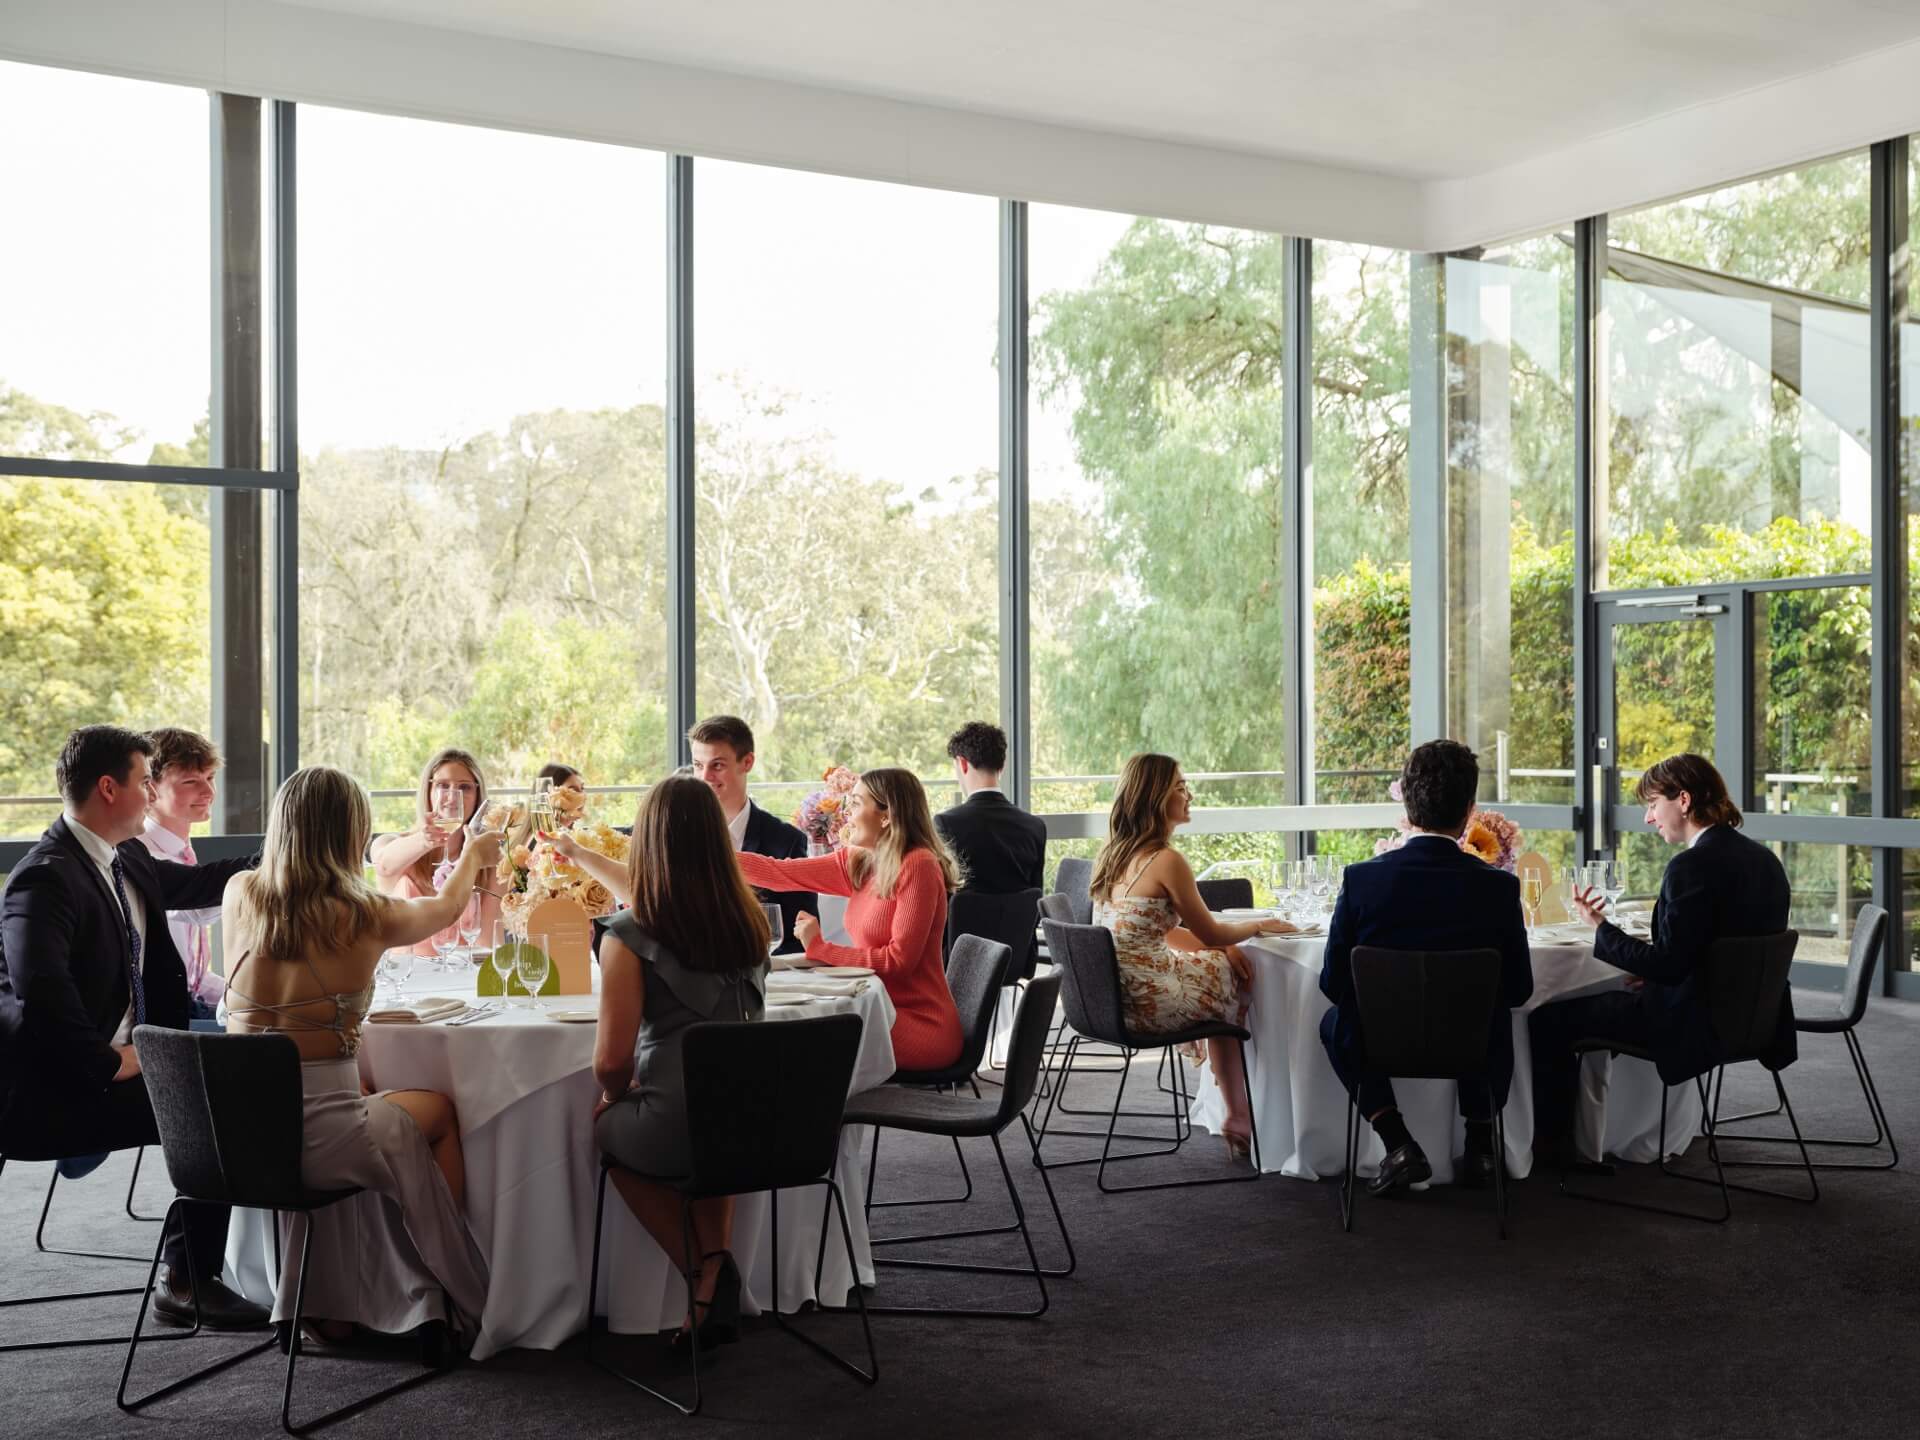 Leonda by the Yarra: a stunning riverside venue for events and weddings.